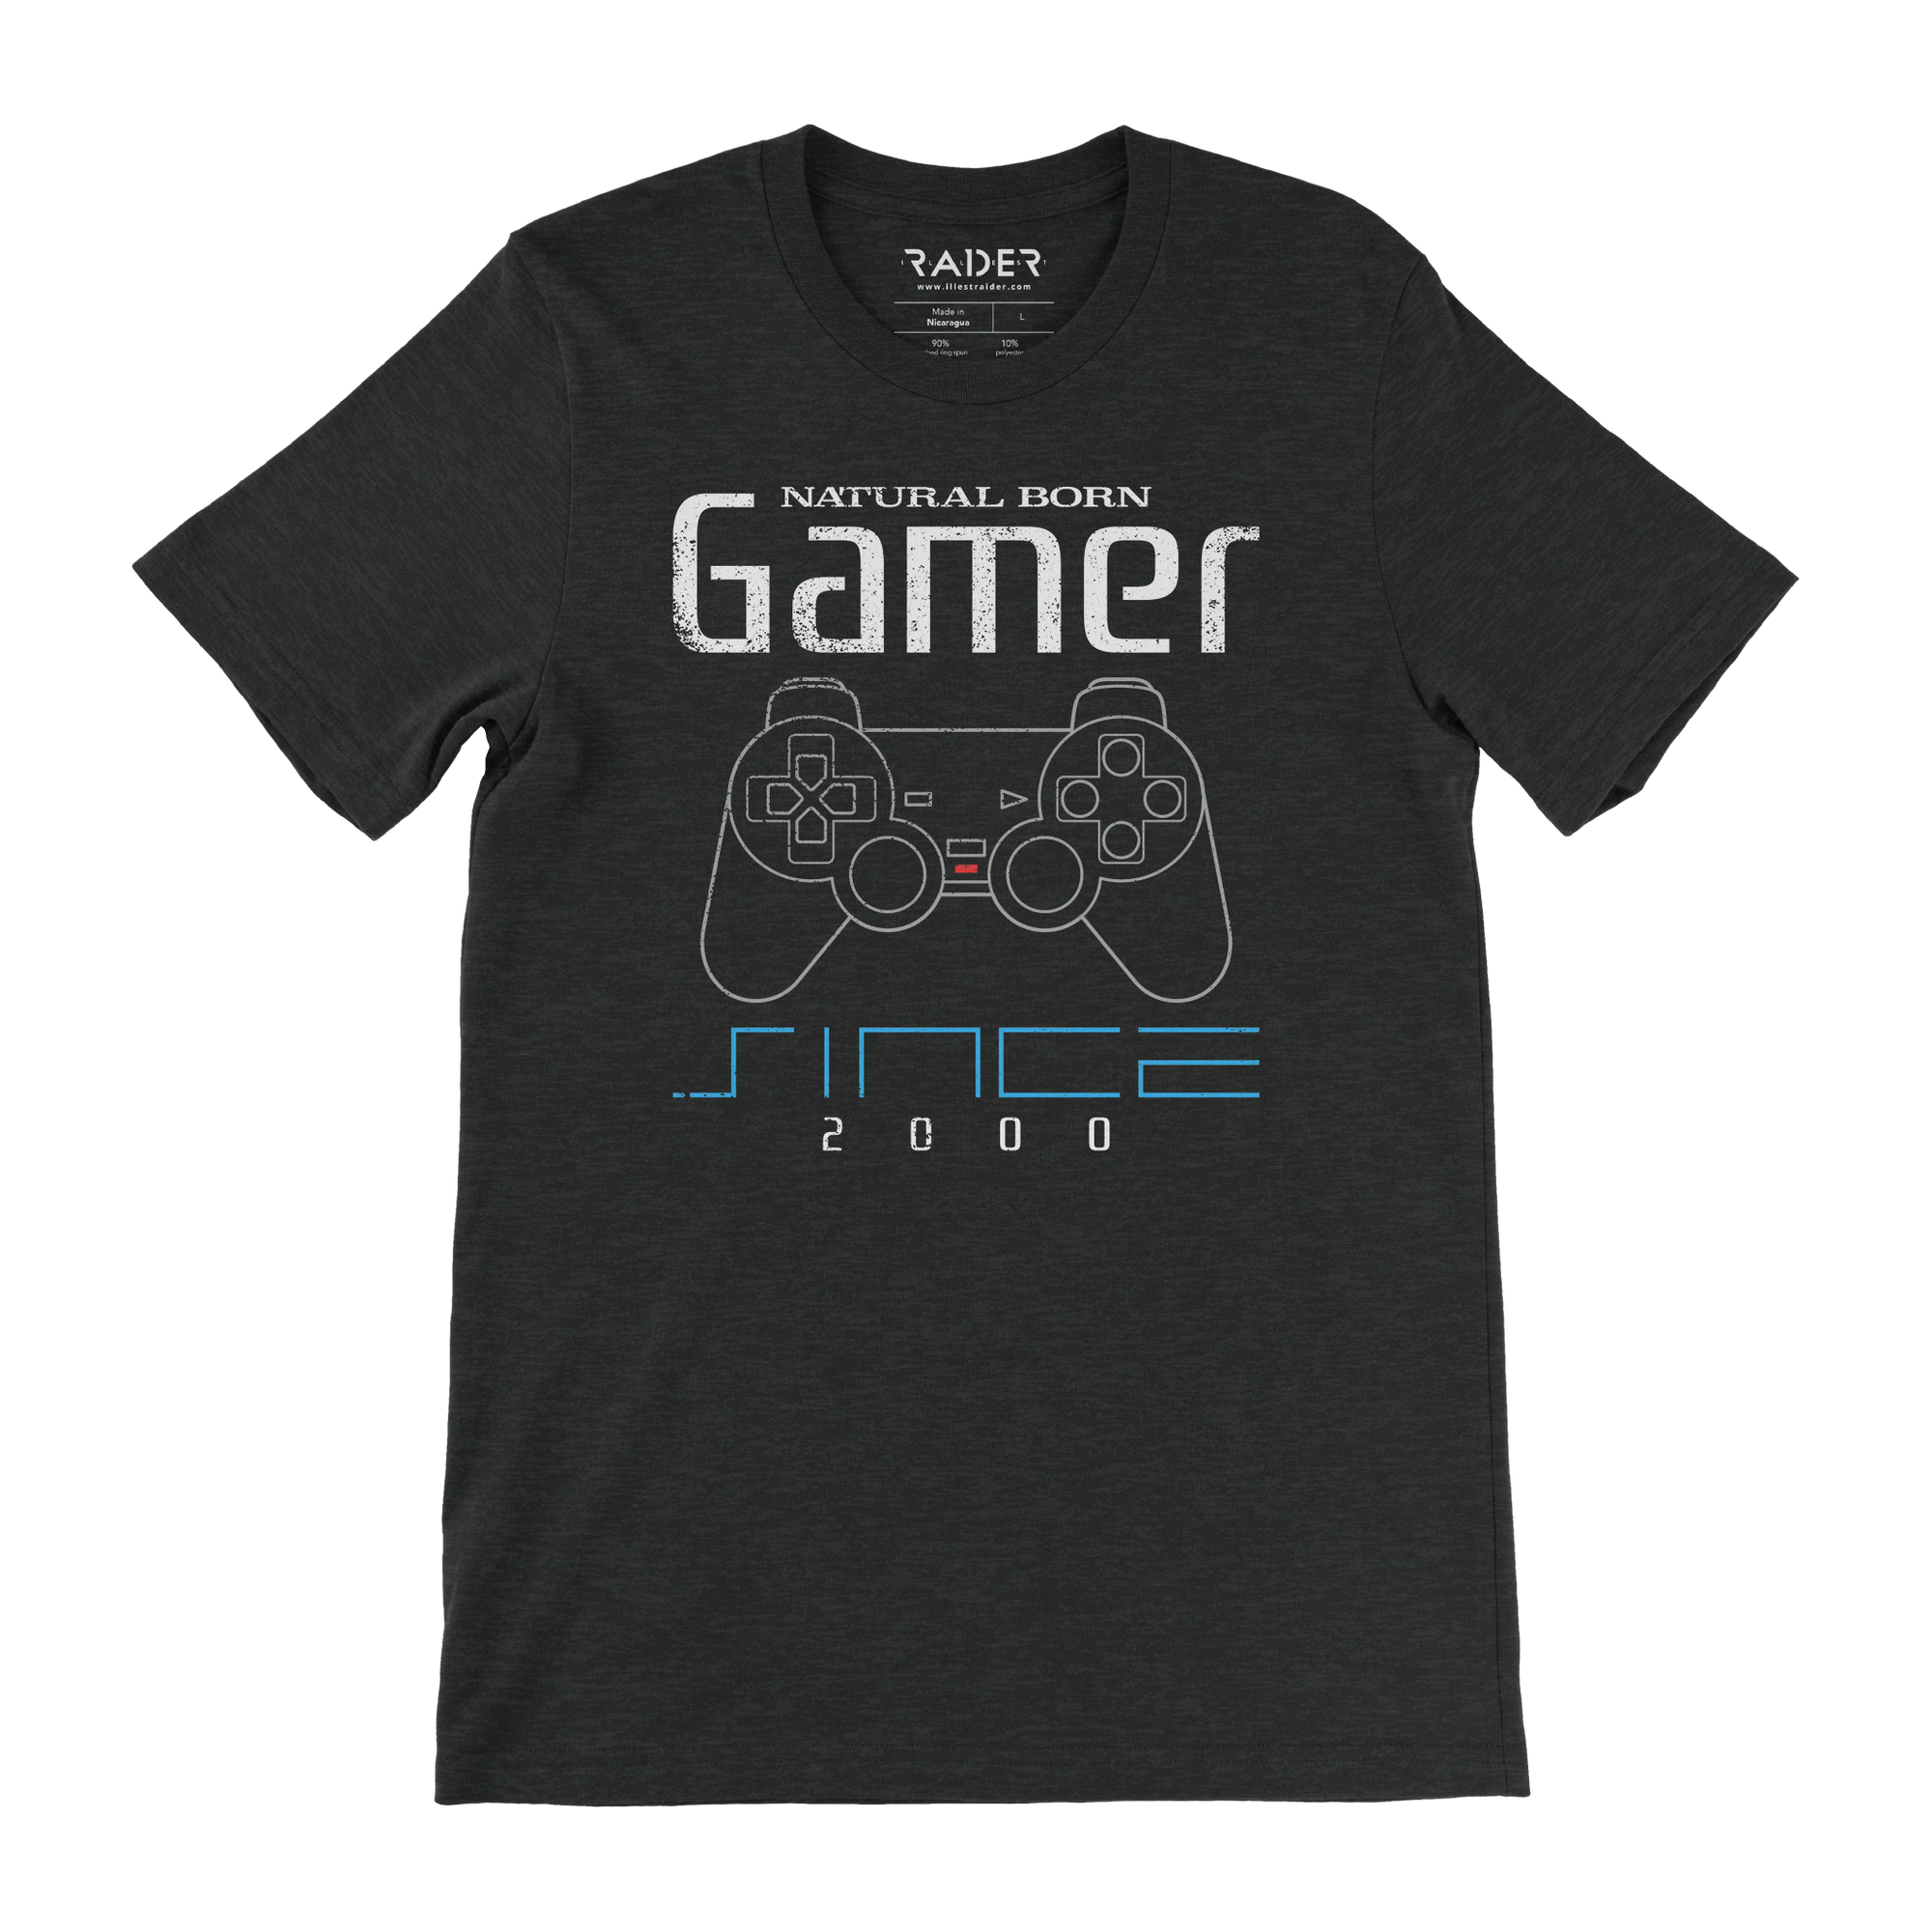 Natural Born Gamer Since 2000 Unisex Tee